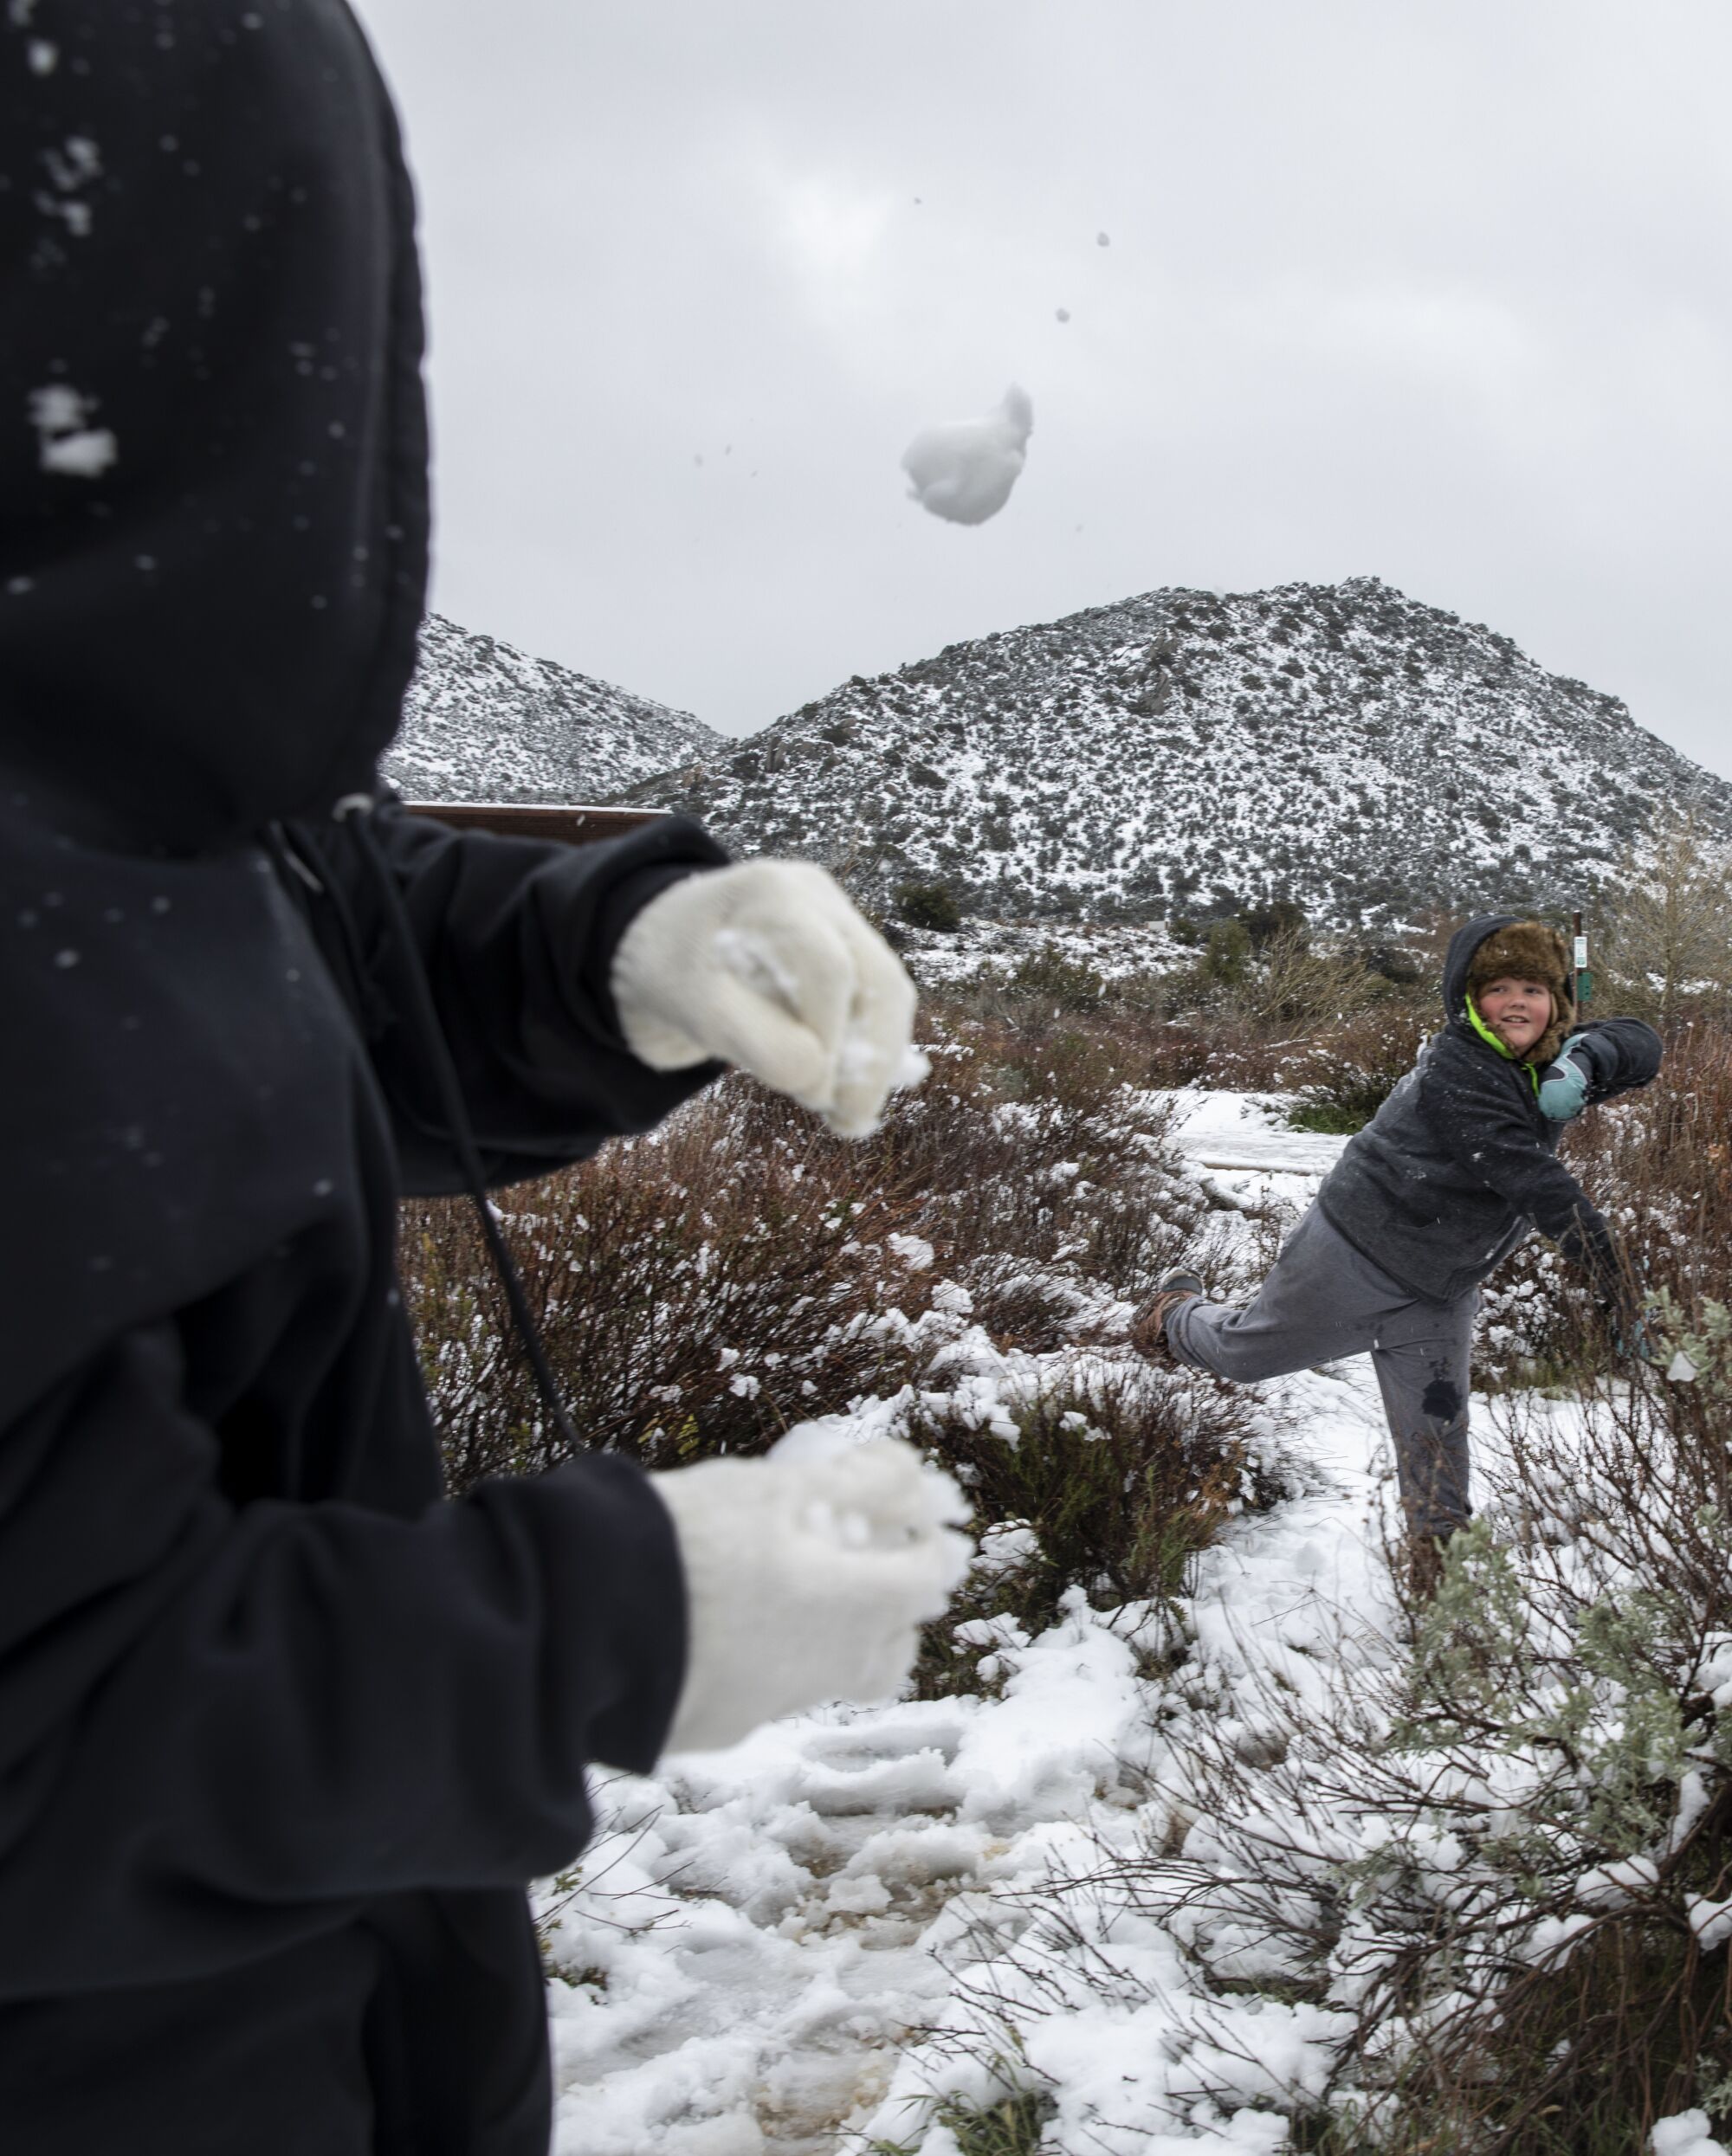 Kairo Ceballos Brylon Barcheers, of Yuma, play in the snow at a rest stop off of Interstate 8 near Pine Valley.